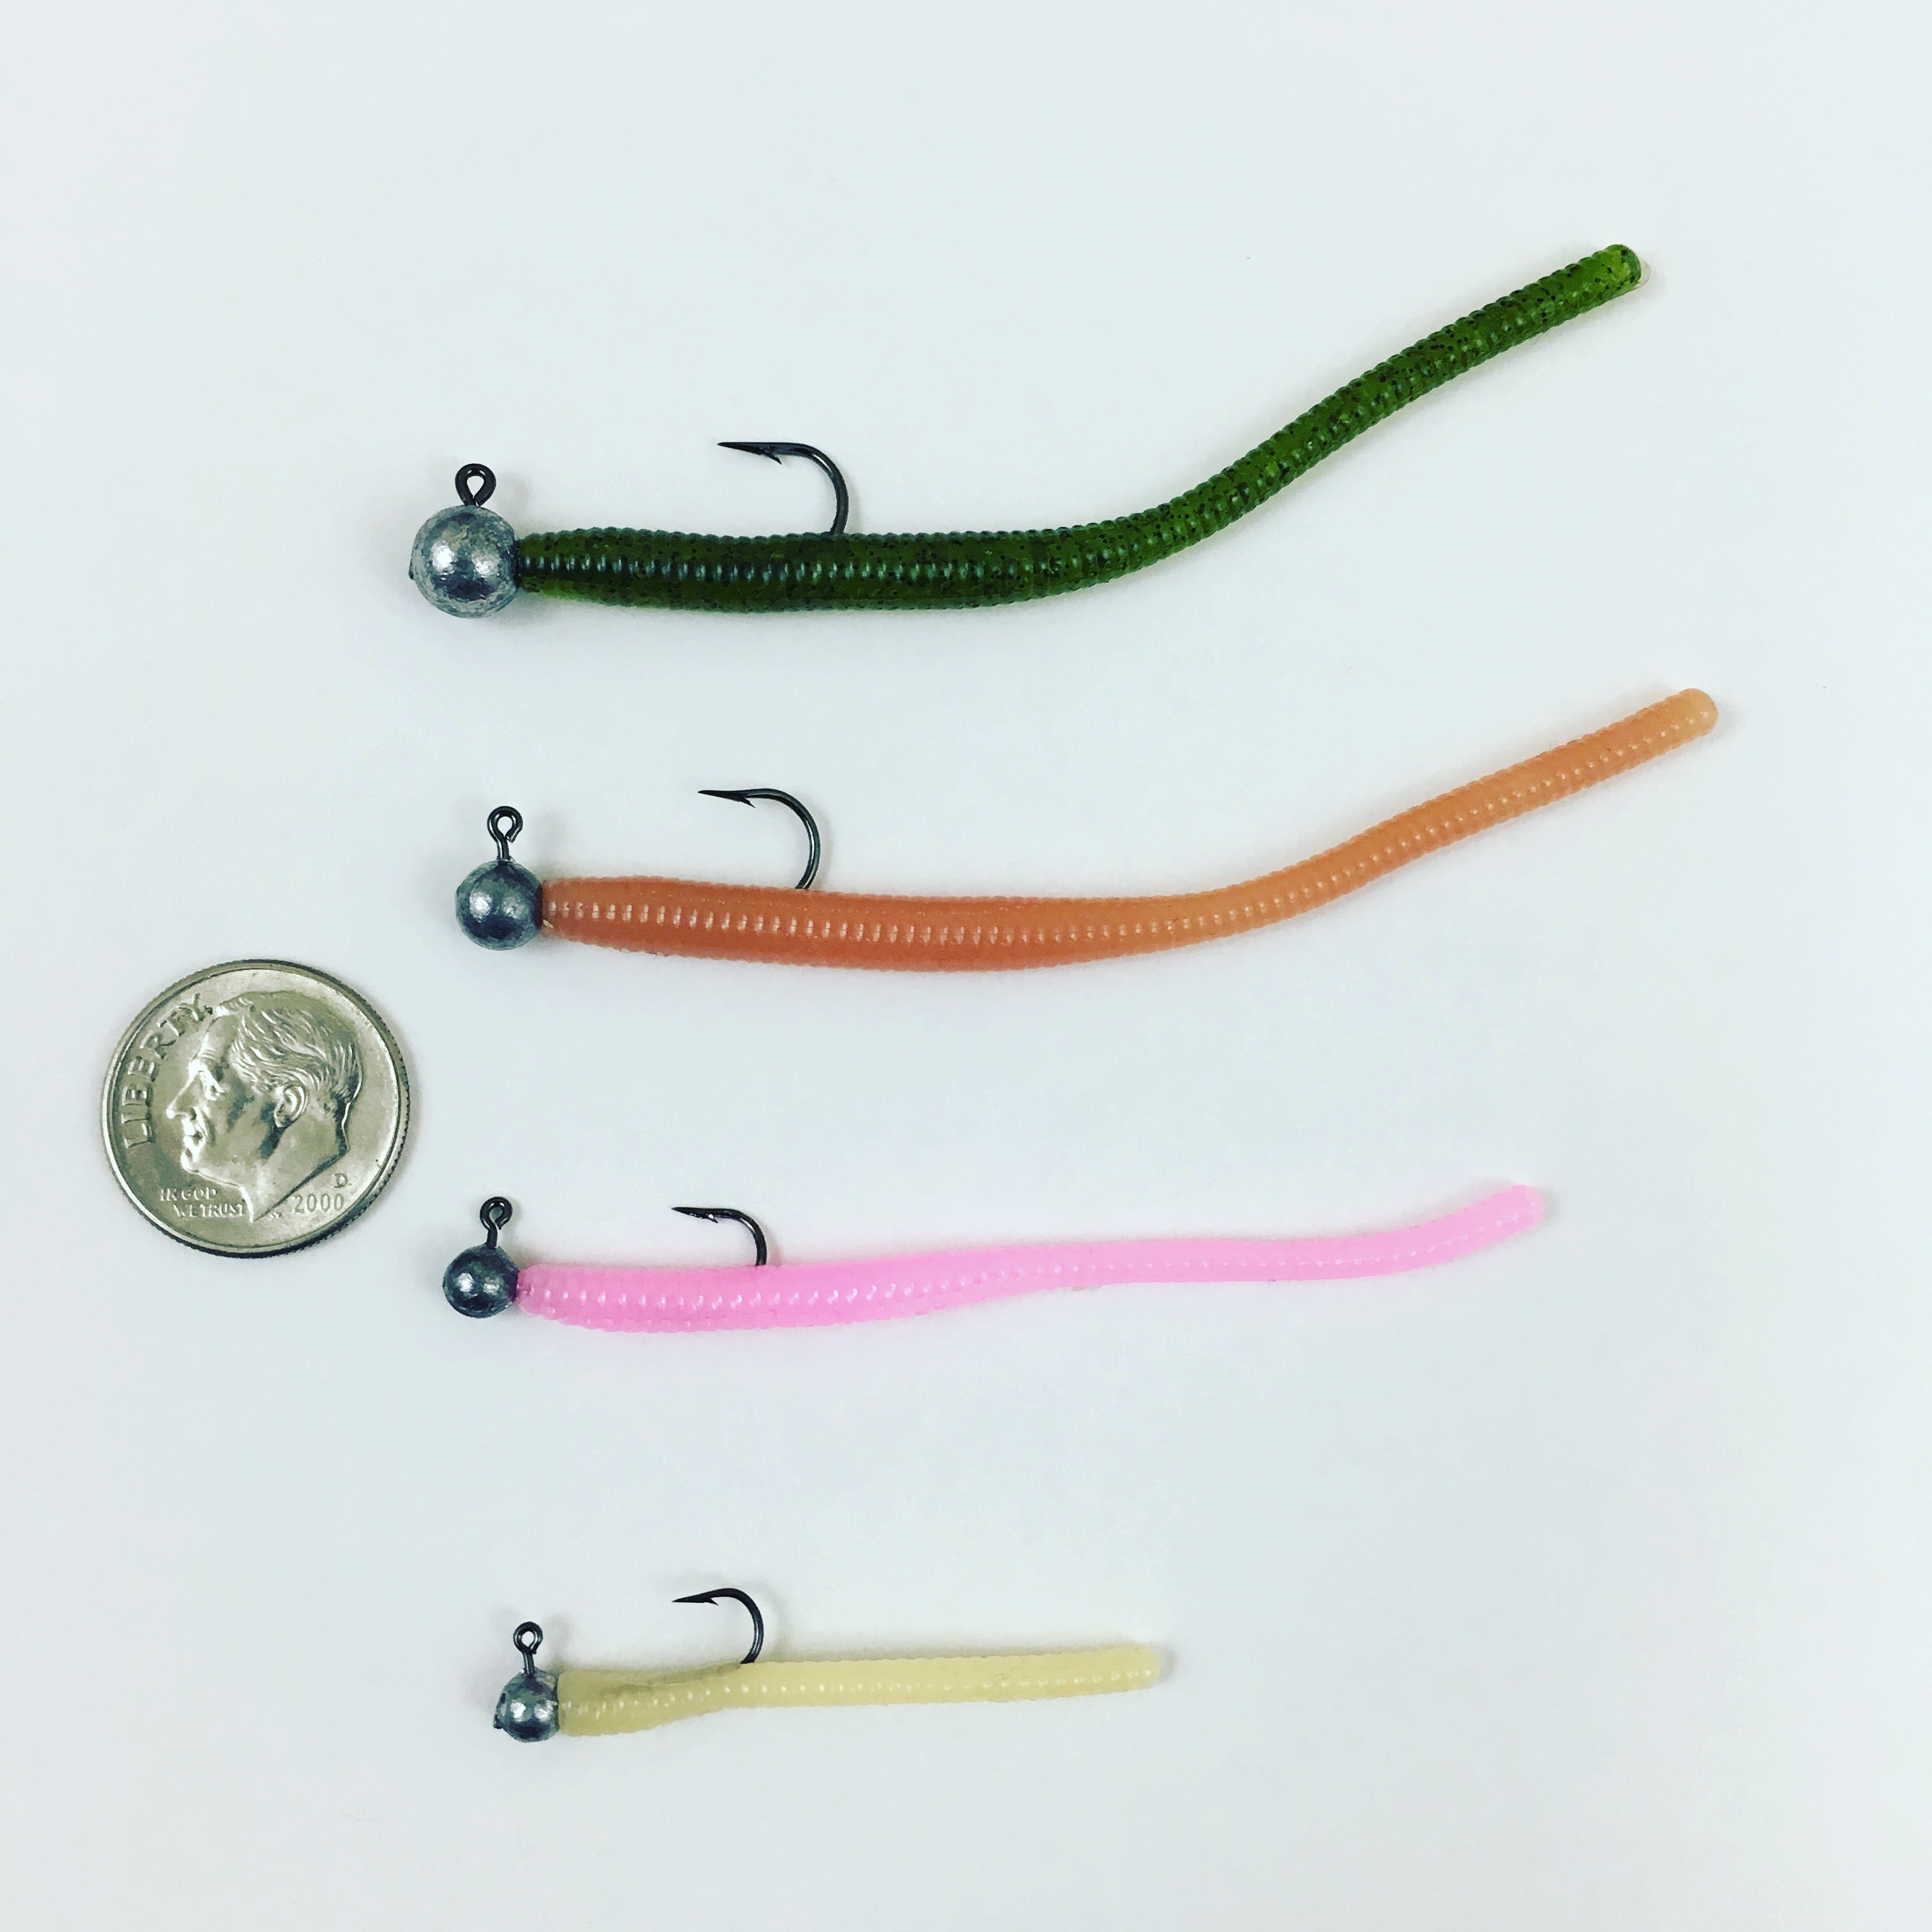 Super Floating Trout Worm: Slime Green